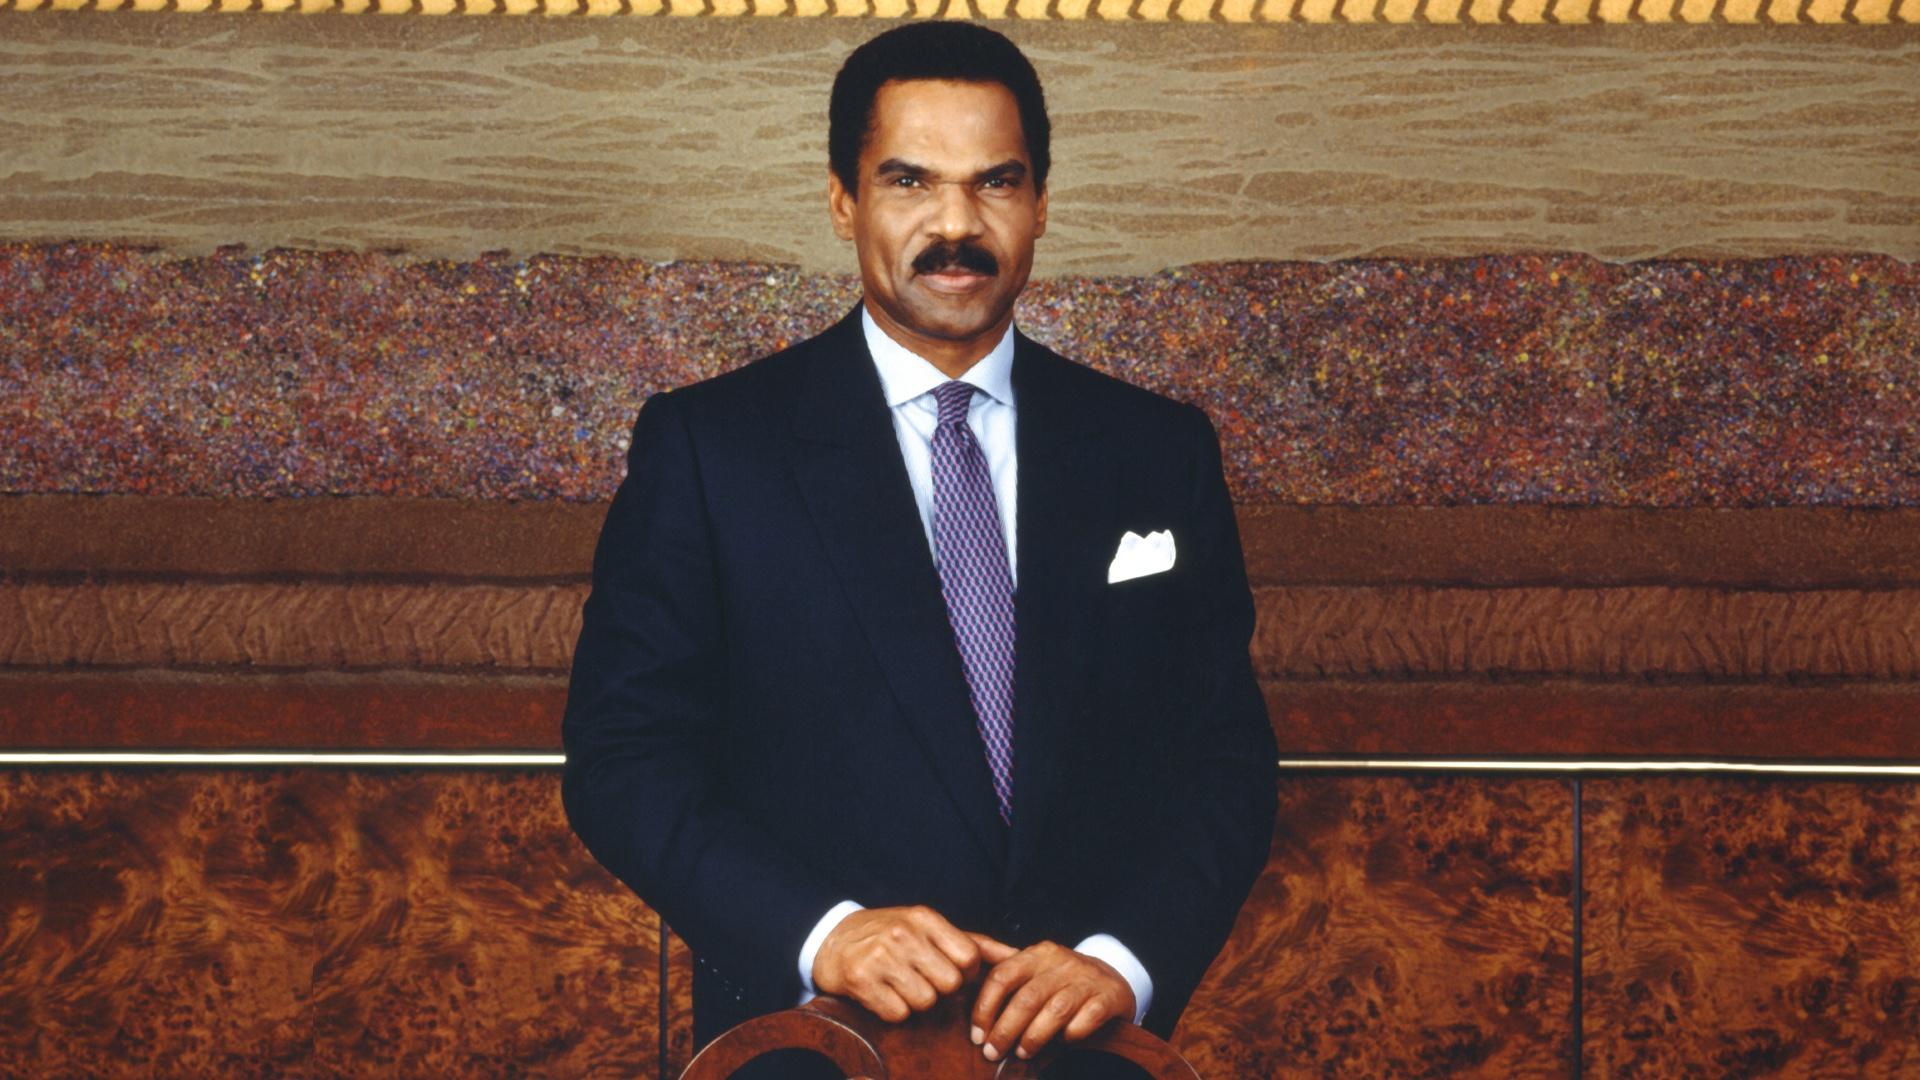 Pioneers  Reginald F. Lewis and the Making of a Billion Dollar